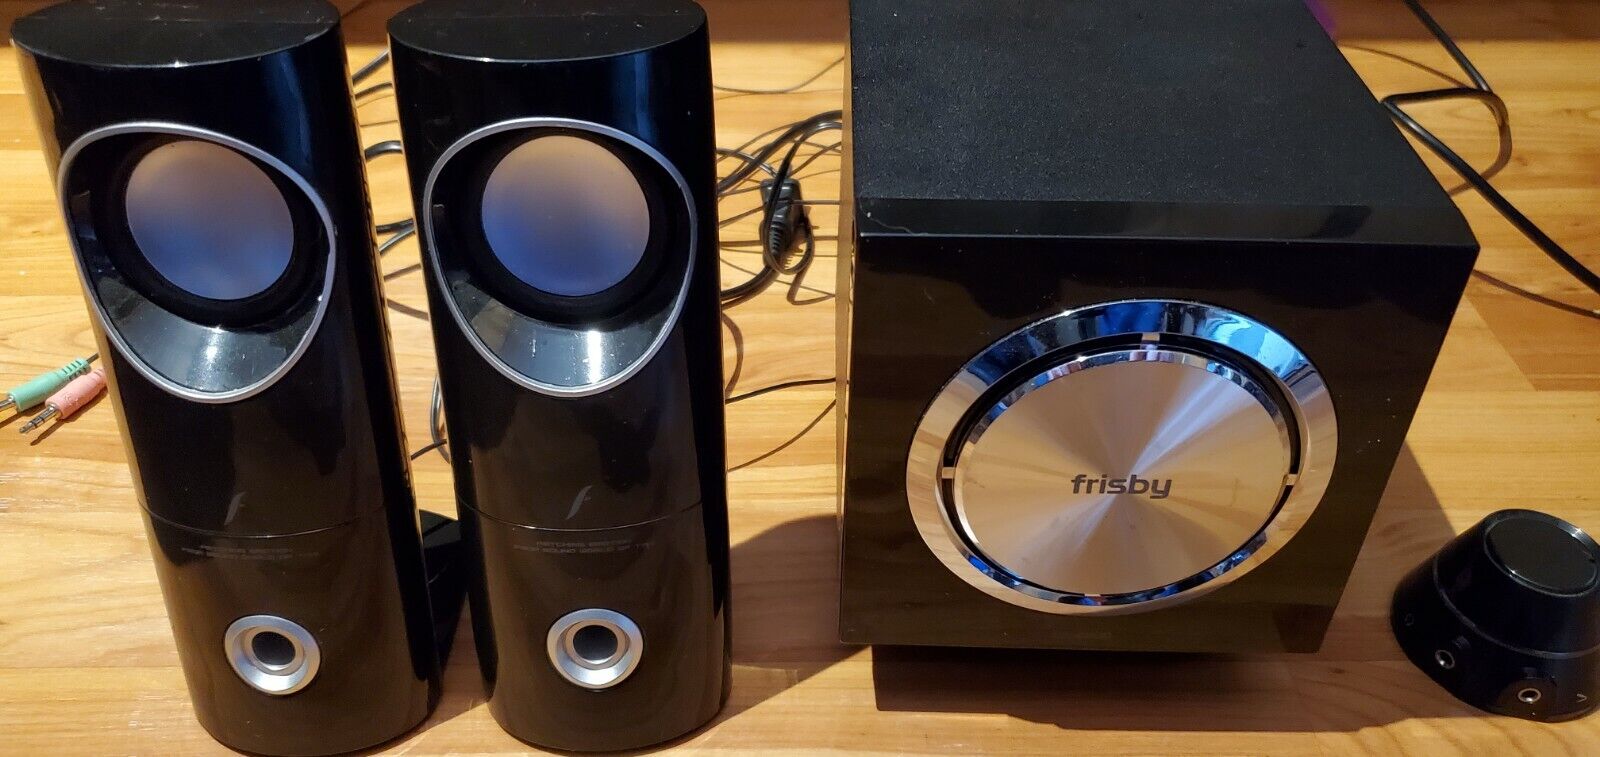 Frisby FS-2200 computer amp and speakers - WORKS